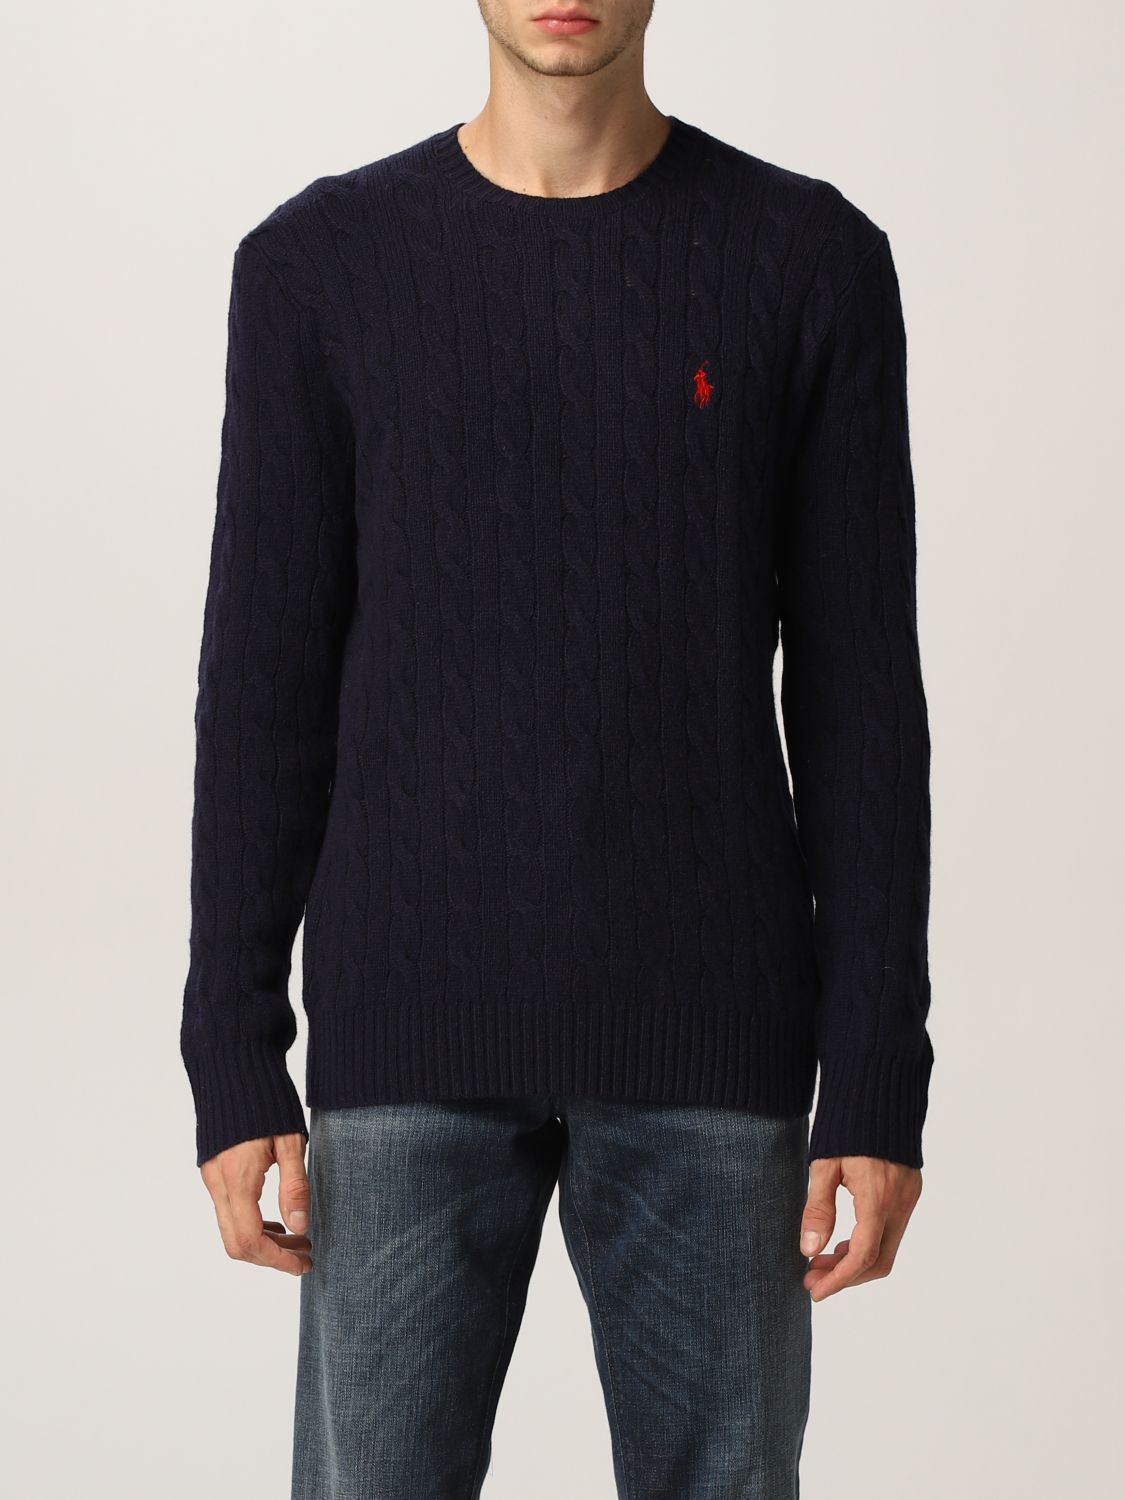 Jumper Polo Ralph Lauren: Polo Ralph Lauren jumper in cable-knit cashmere navy 1